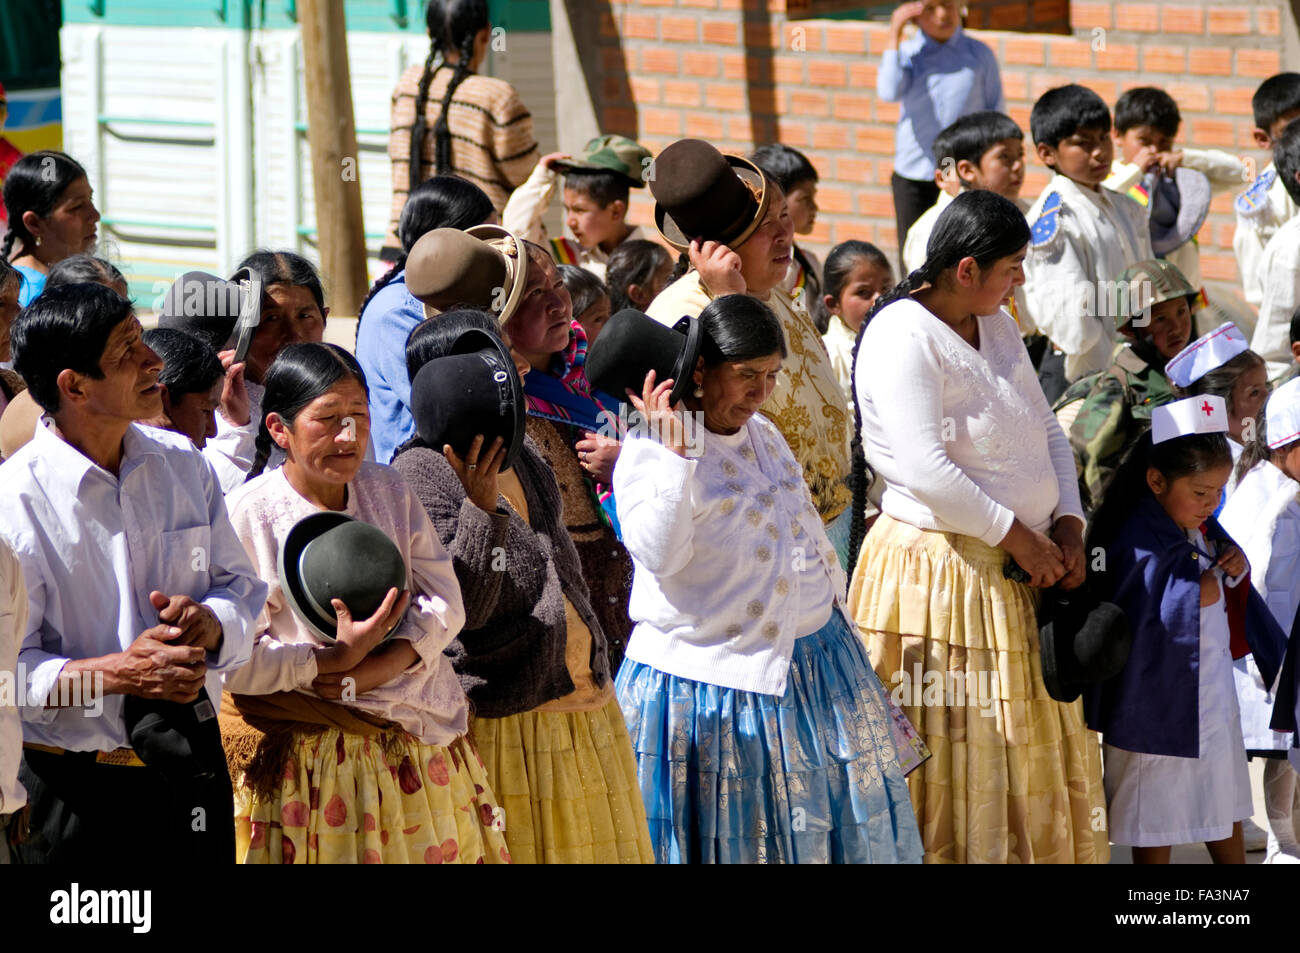 Spectators, musicians, government heads at the 500 year celebration of Luribay, Bolivia, a small Bolivian village, South America Stock Photo